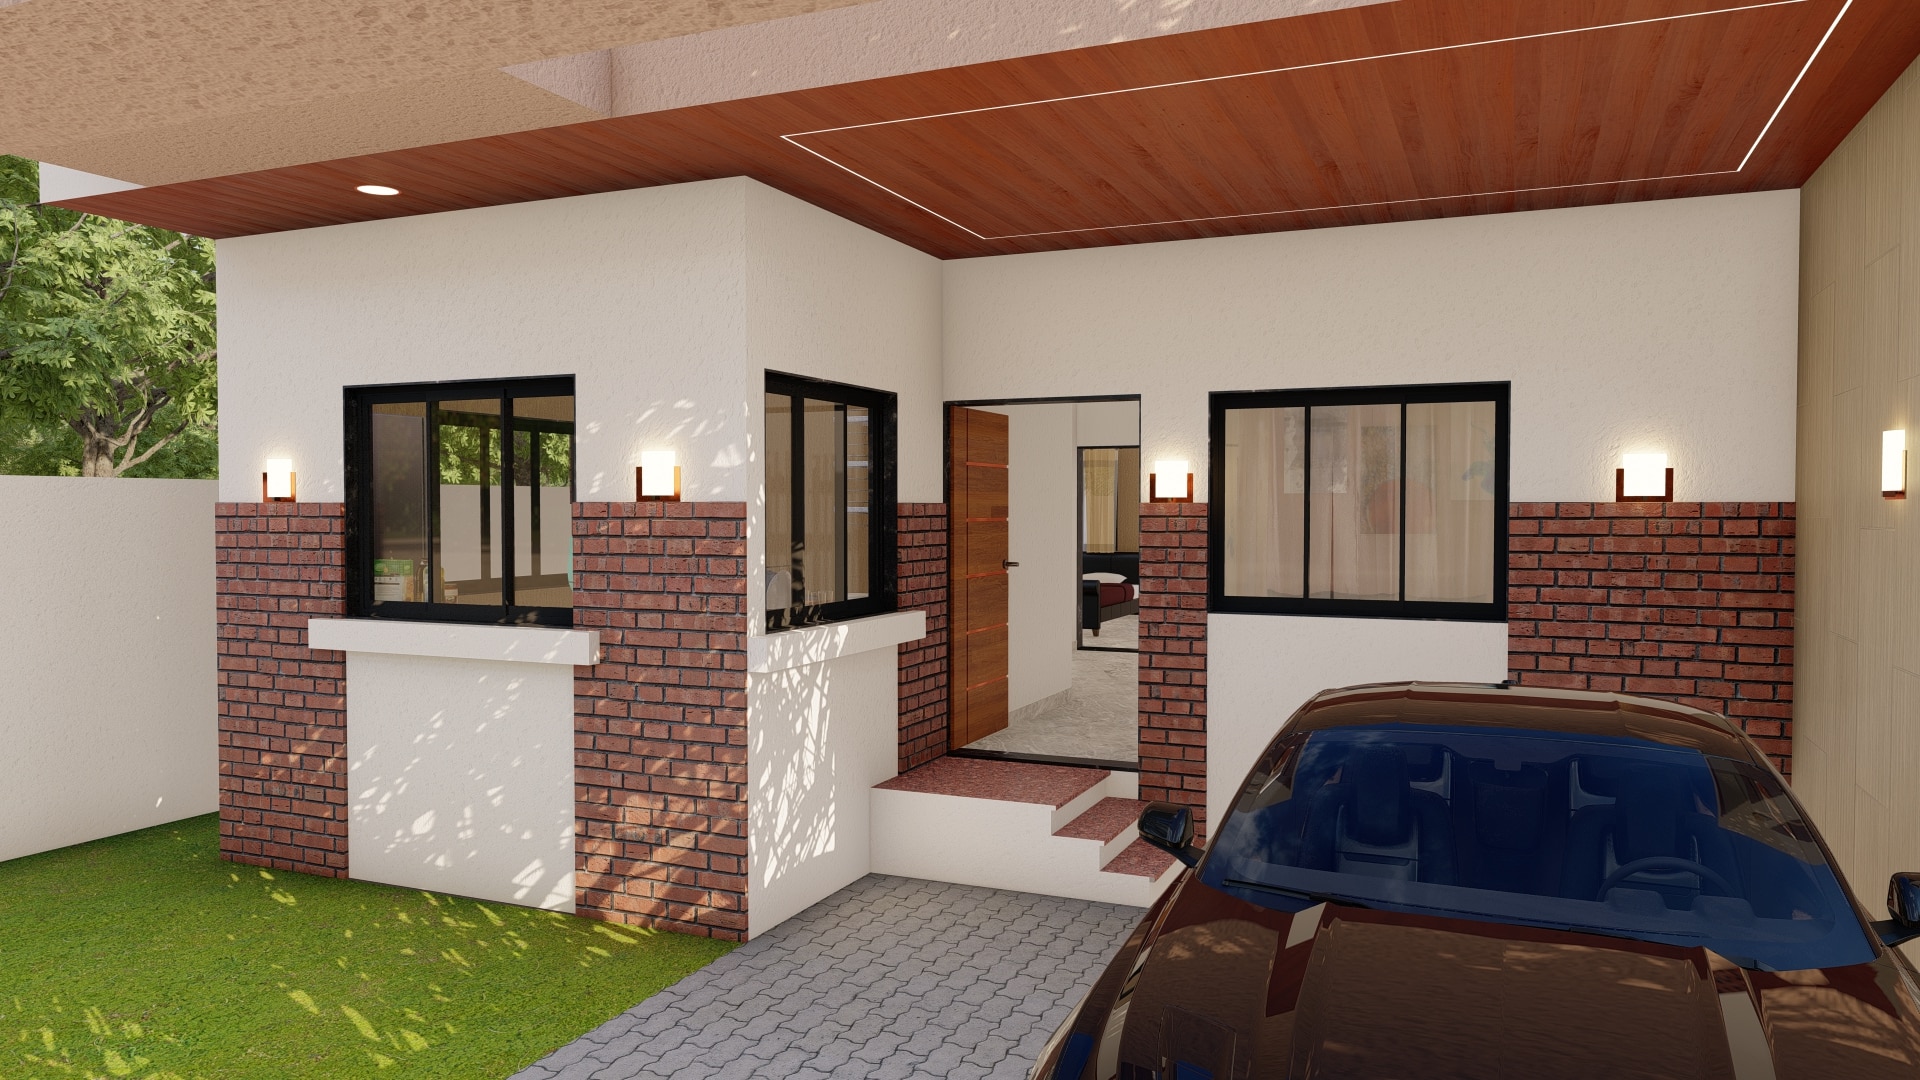 enterance porch of best villa home layout design by urban terrace east facing 1800 sq ft